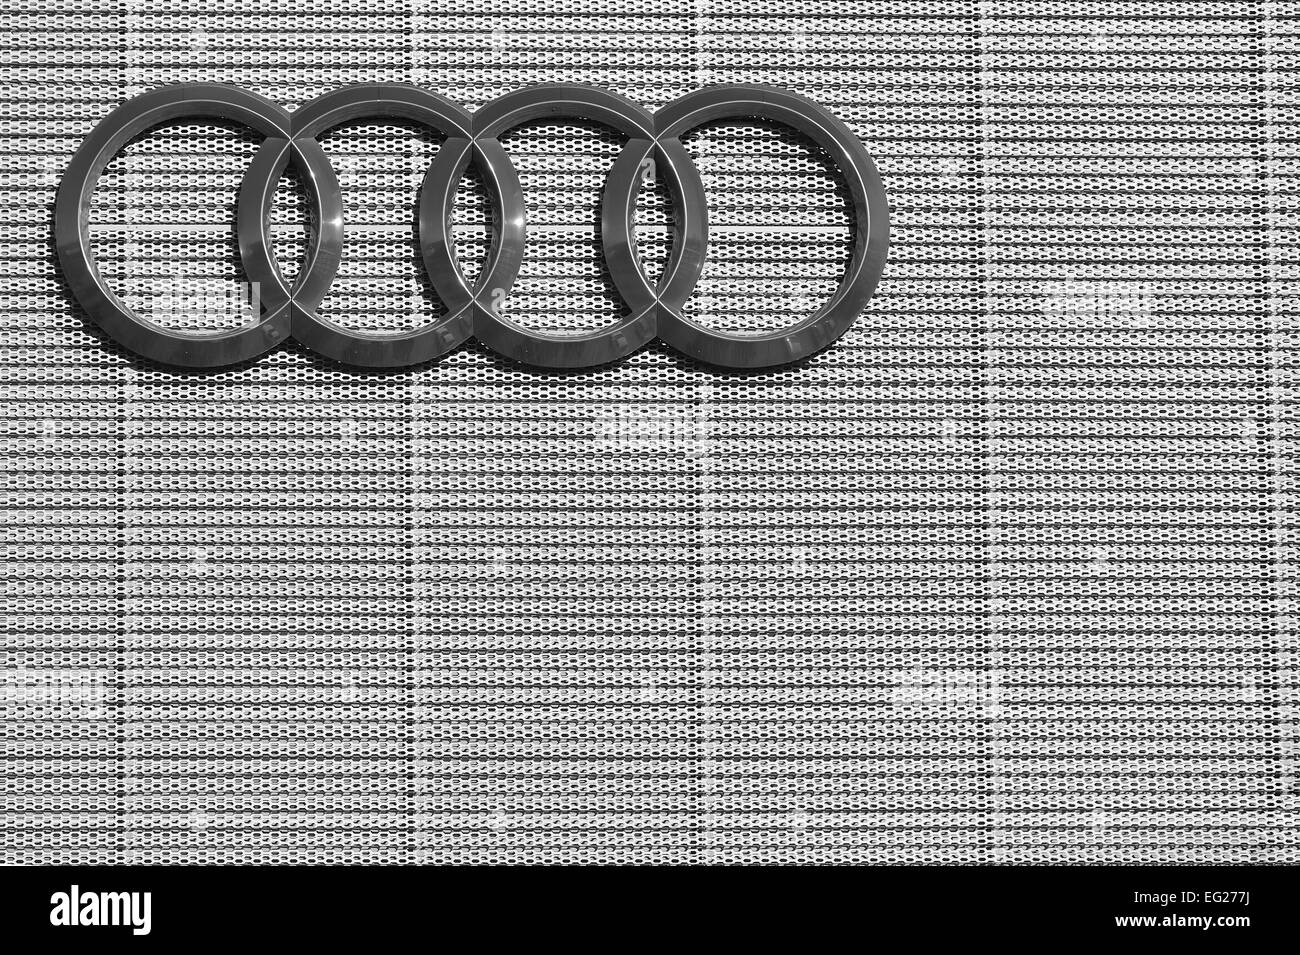 Audi Black and White Stock Photos & Images - Alamy